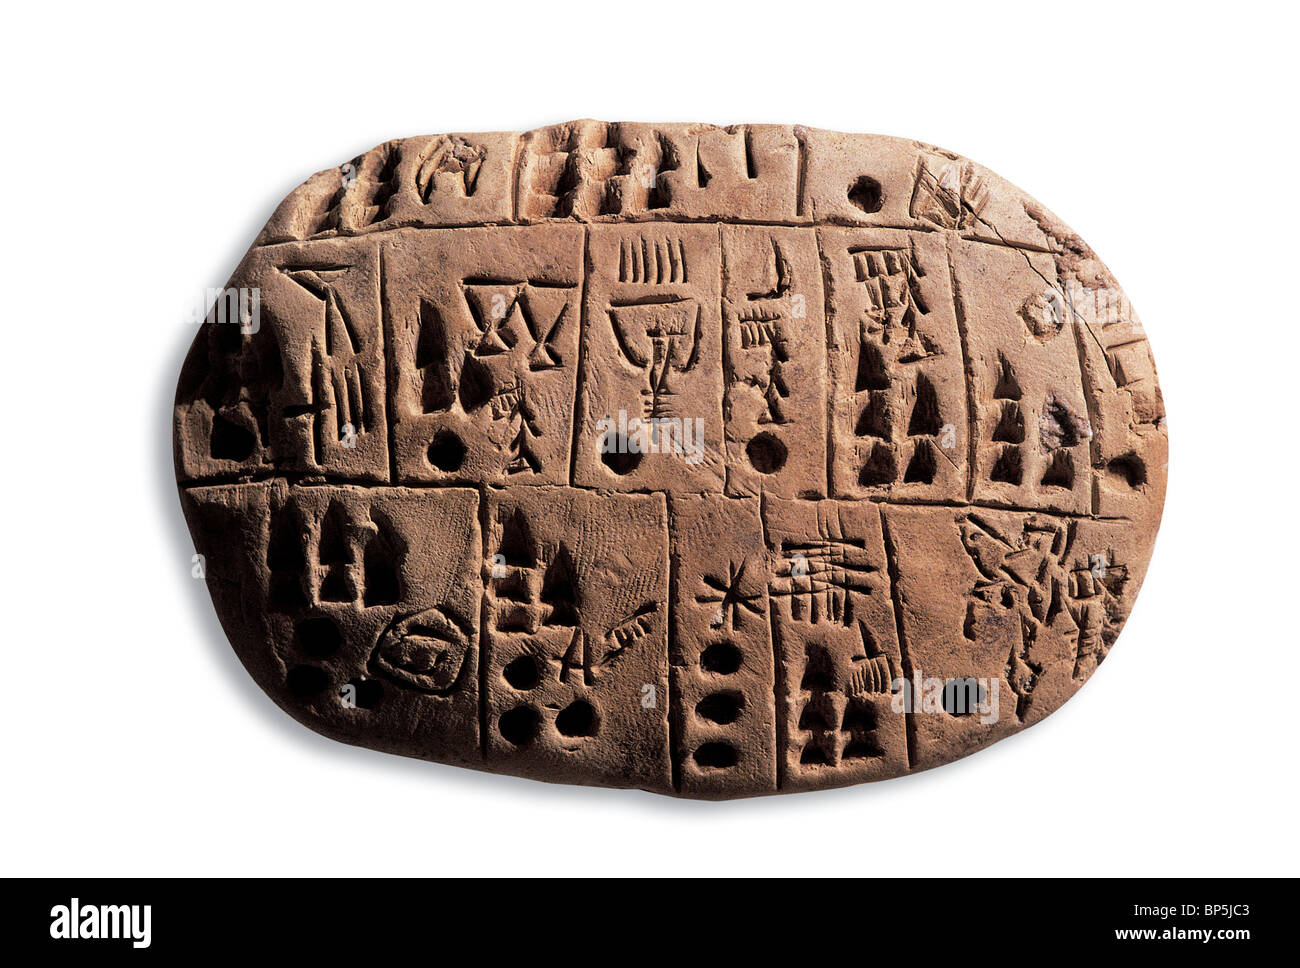 Clay tablet inscribed with an Archaic Pictographic script. Originating in Mesopotamia in the late fourth millenium BC this is t Stock Photo